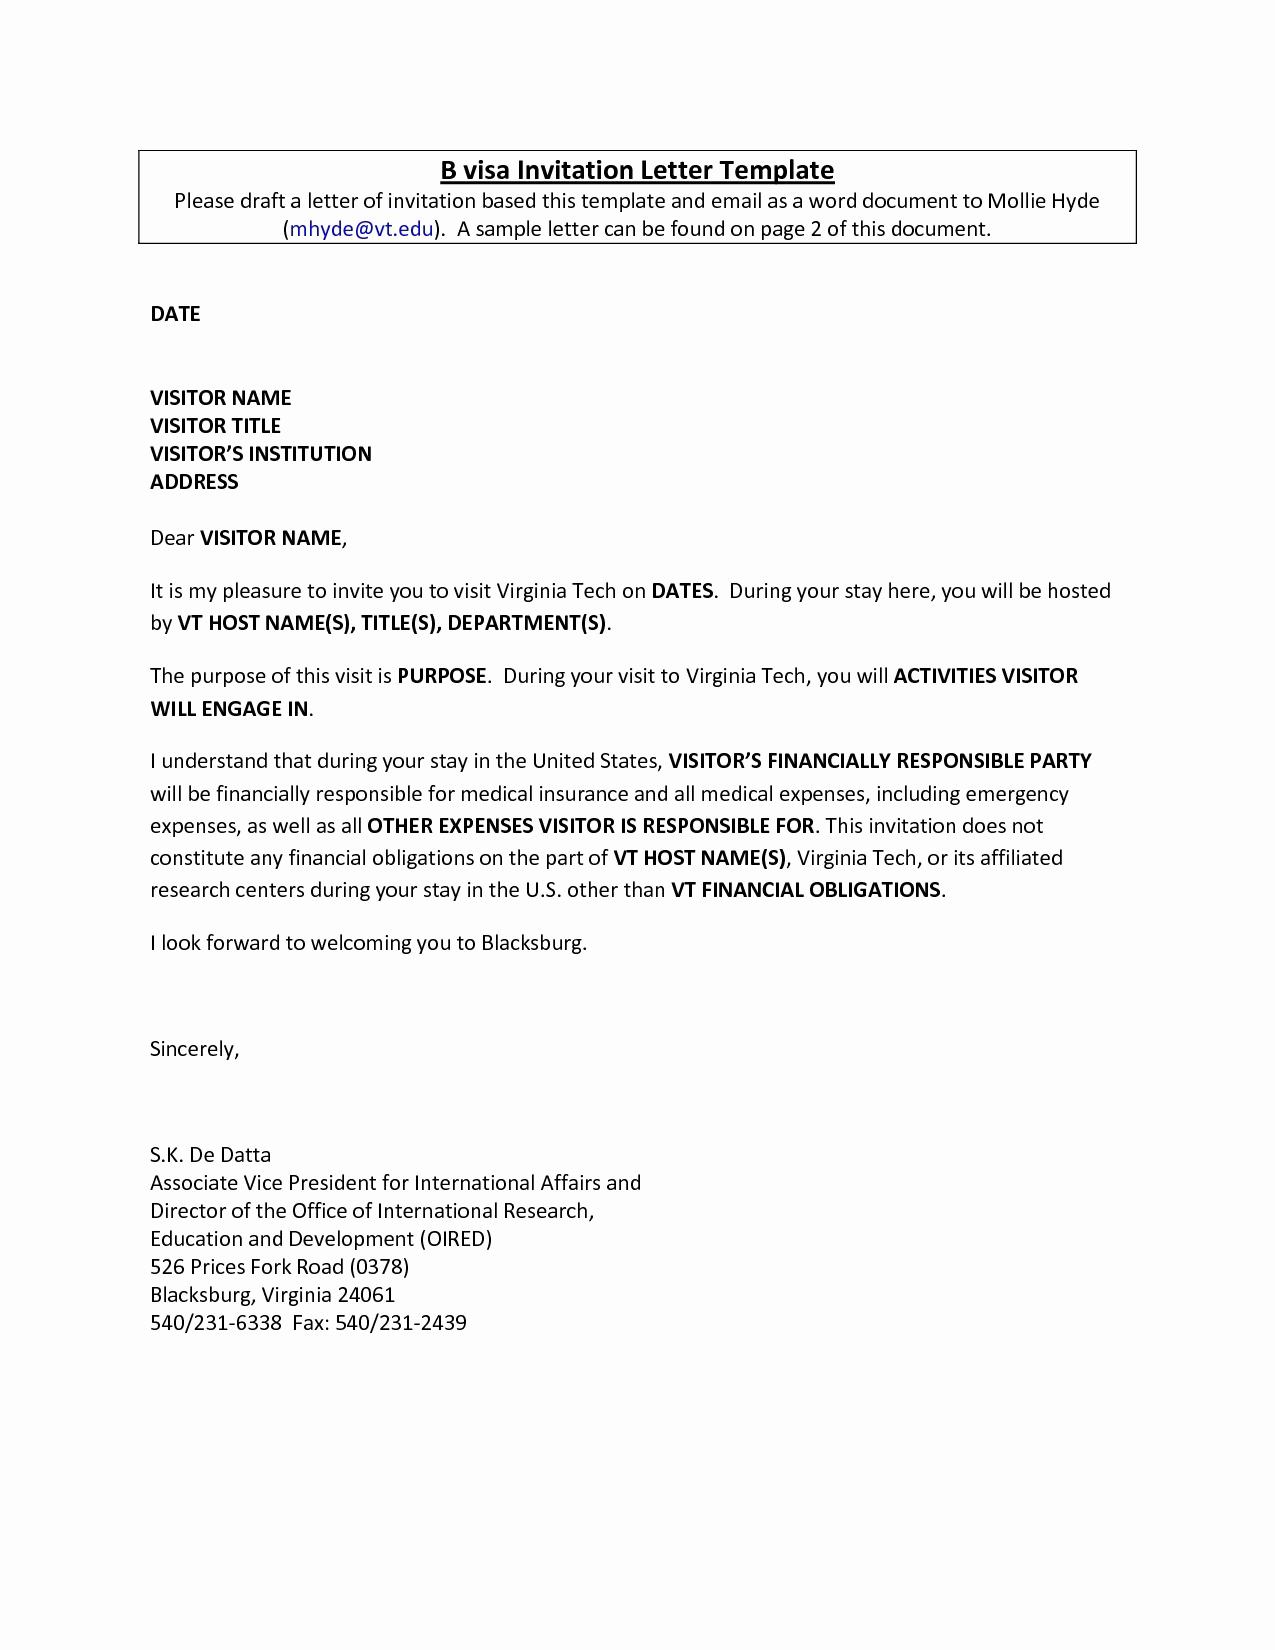 Proof Of Health Insurance Letter Template - 53 New Sample Proof Health Insurance Letter